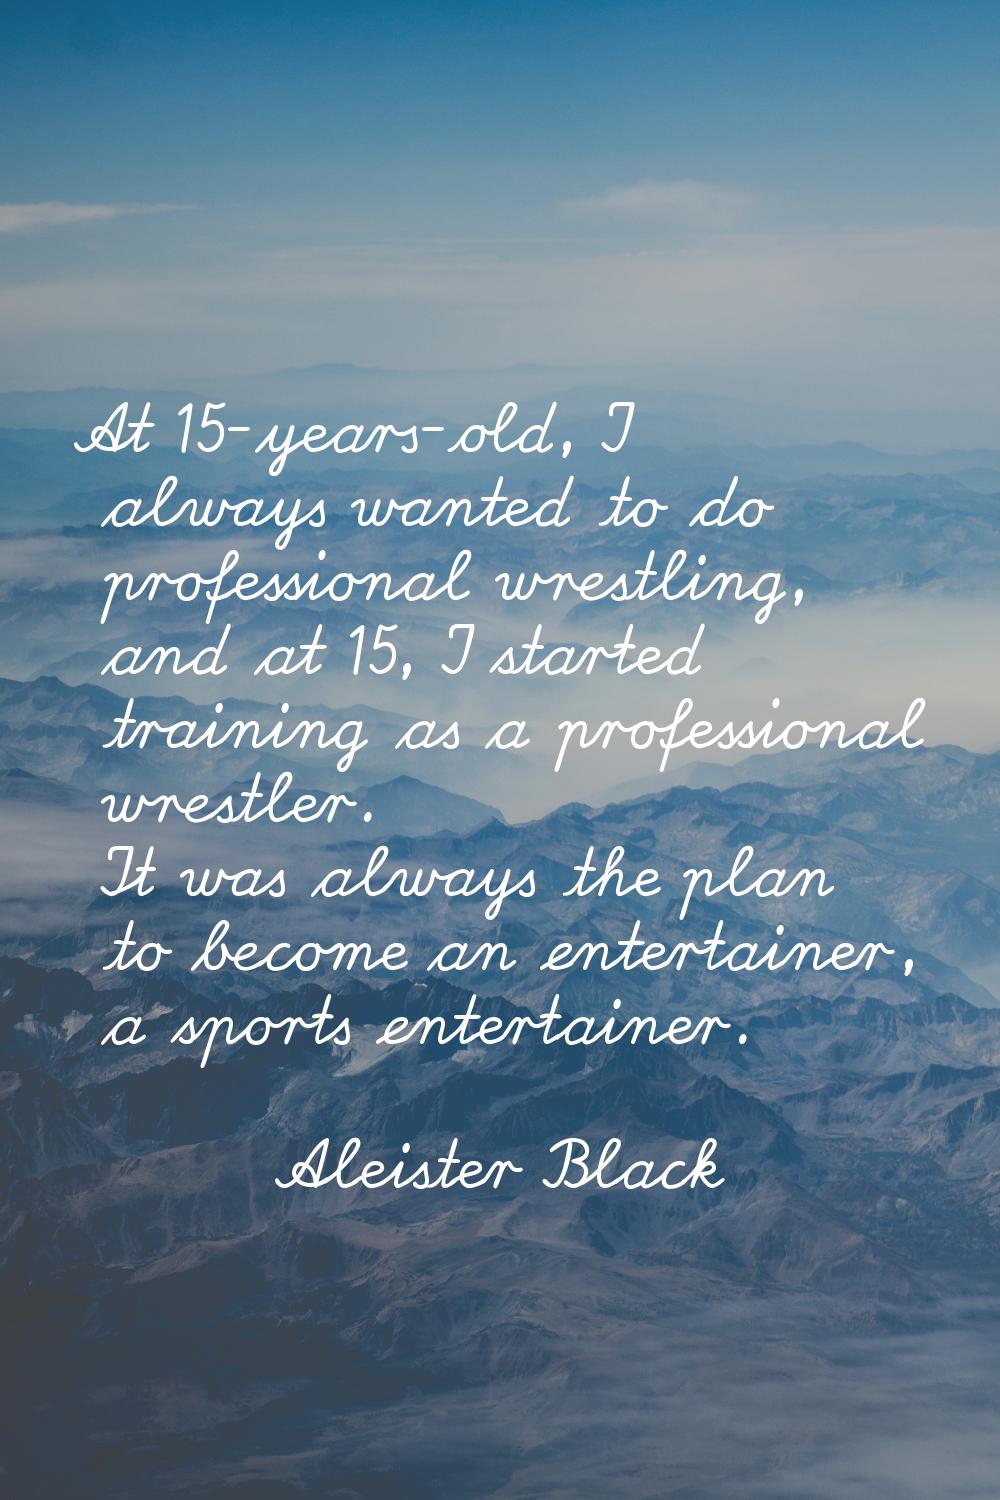 At 15-years-old, I always wanted to do professional wrestling, and at 15, I started training as a p